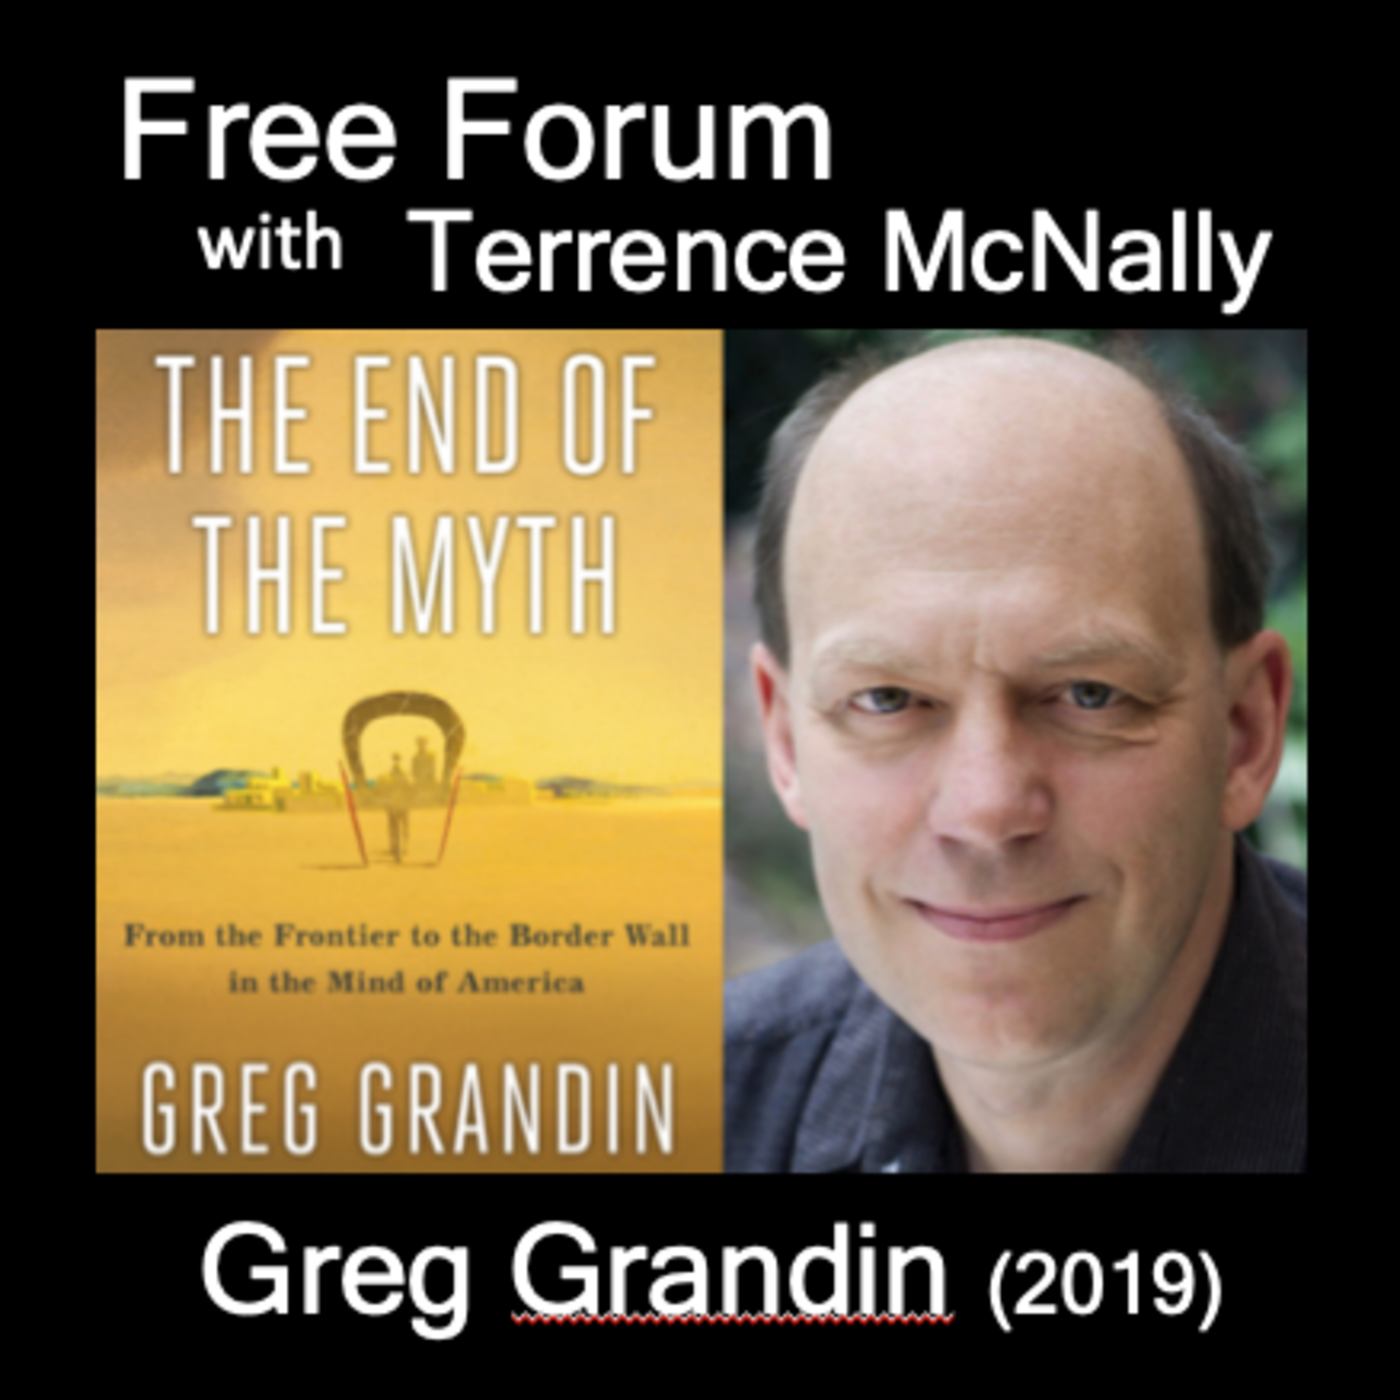 Episode 574: As DeSantis & Abbott pull cruel political stunts-GREG GRANDIN (2019), THE END OF THE MYTH: From the Frontier to the Border Wall